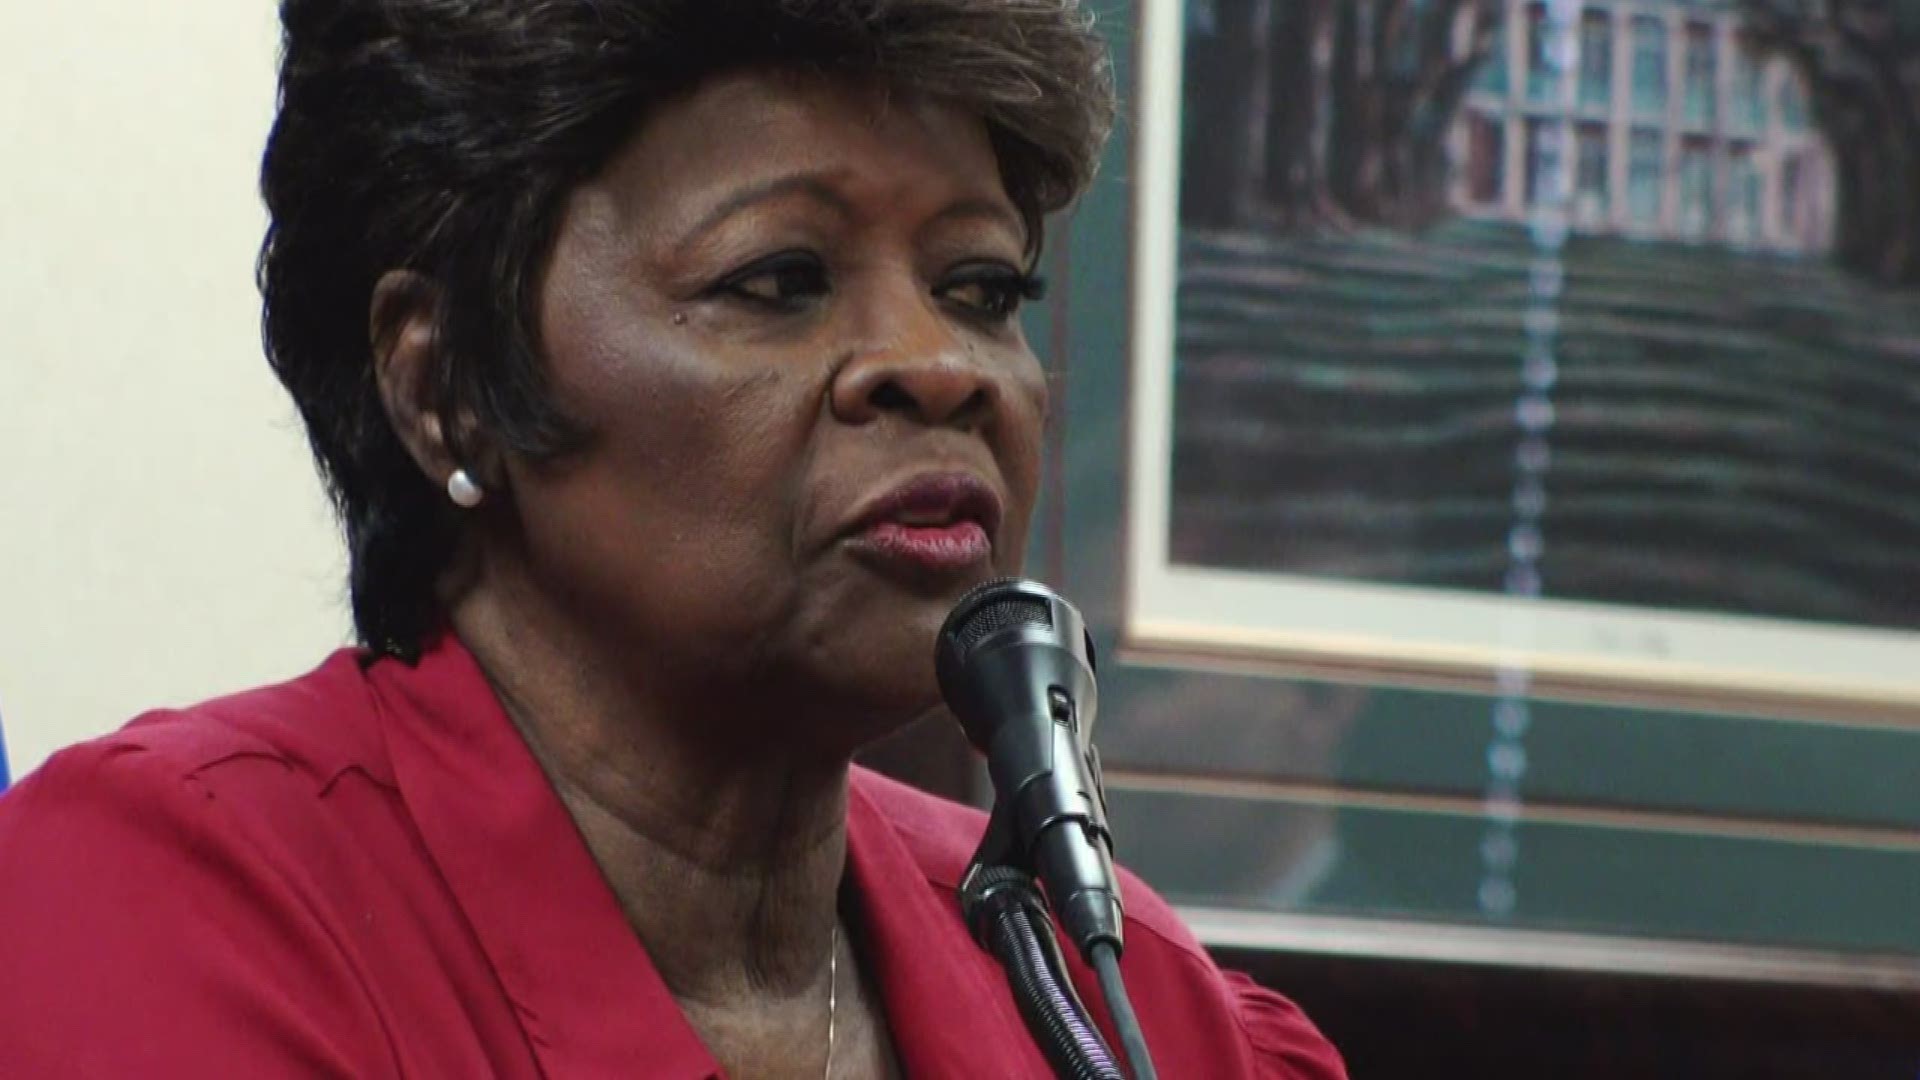 You've seen Irma Thomas performing on stage for decades, but today federal agents from across Louisiana saw another kind of performance from her.